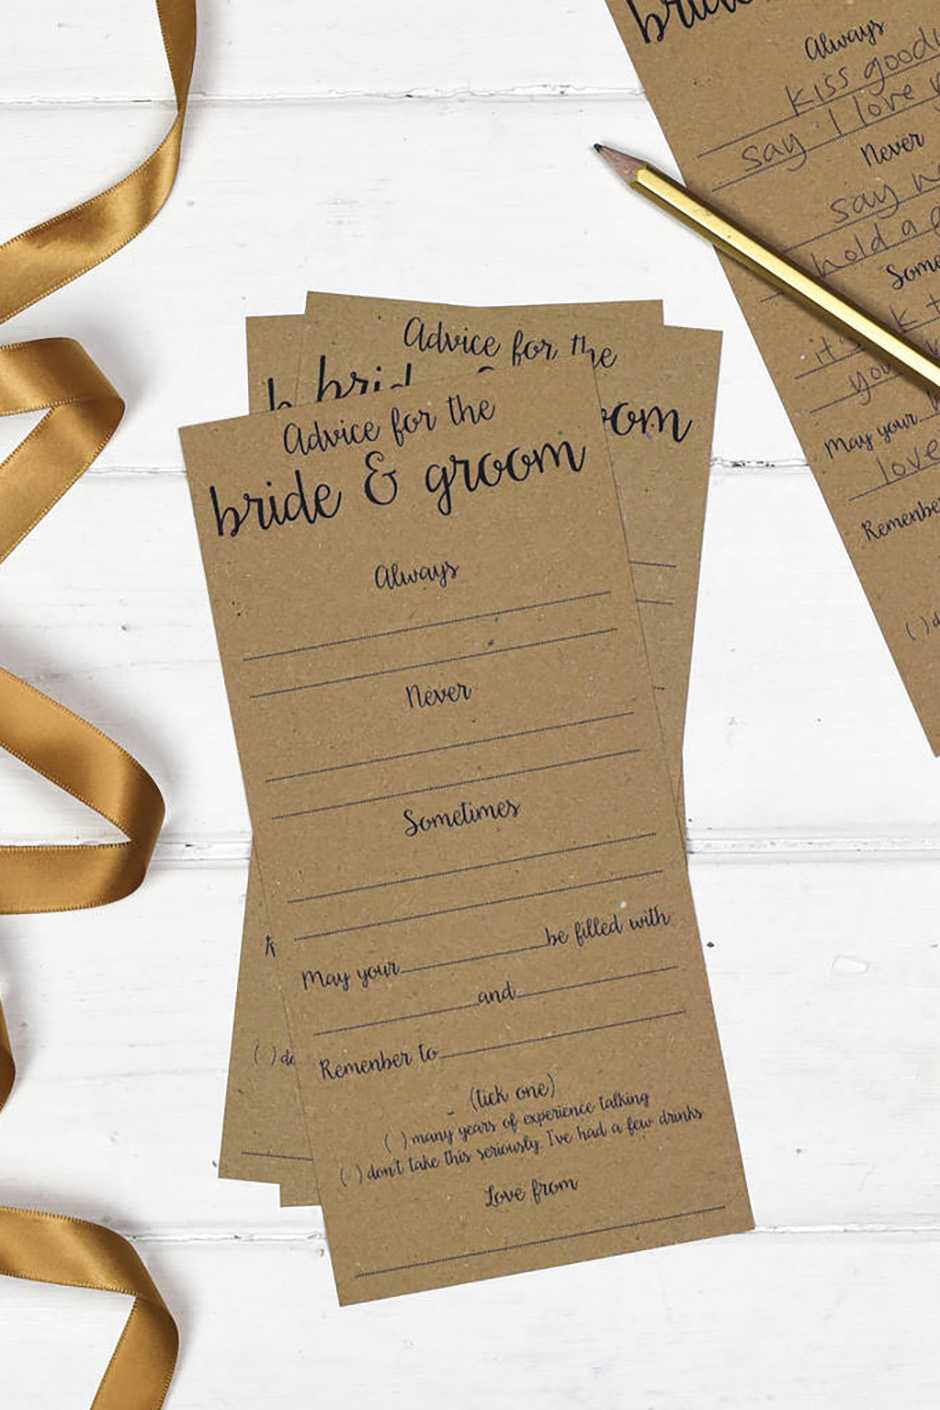 Paper advice cards for the bride and groom for guests to write at wedding